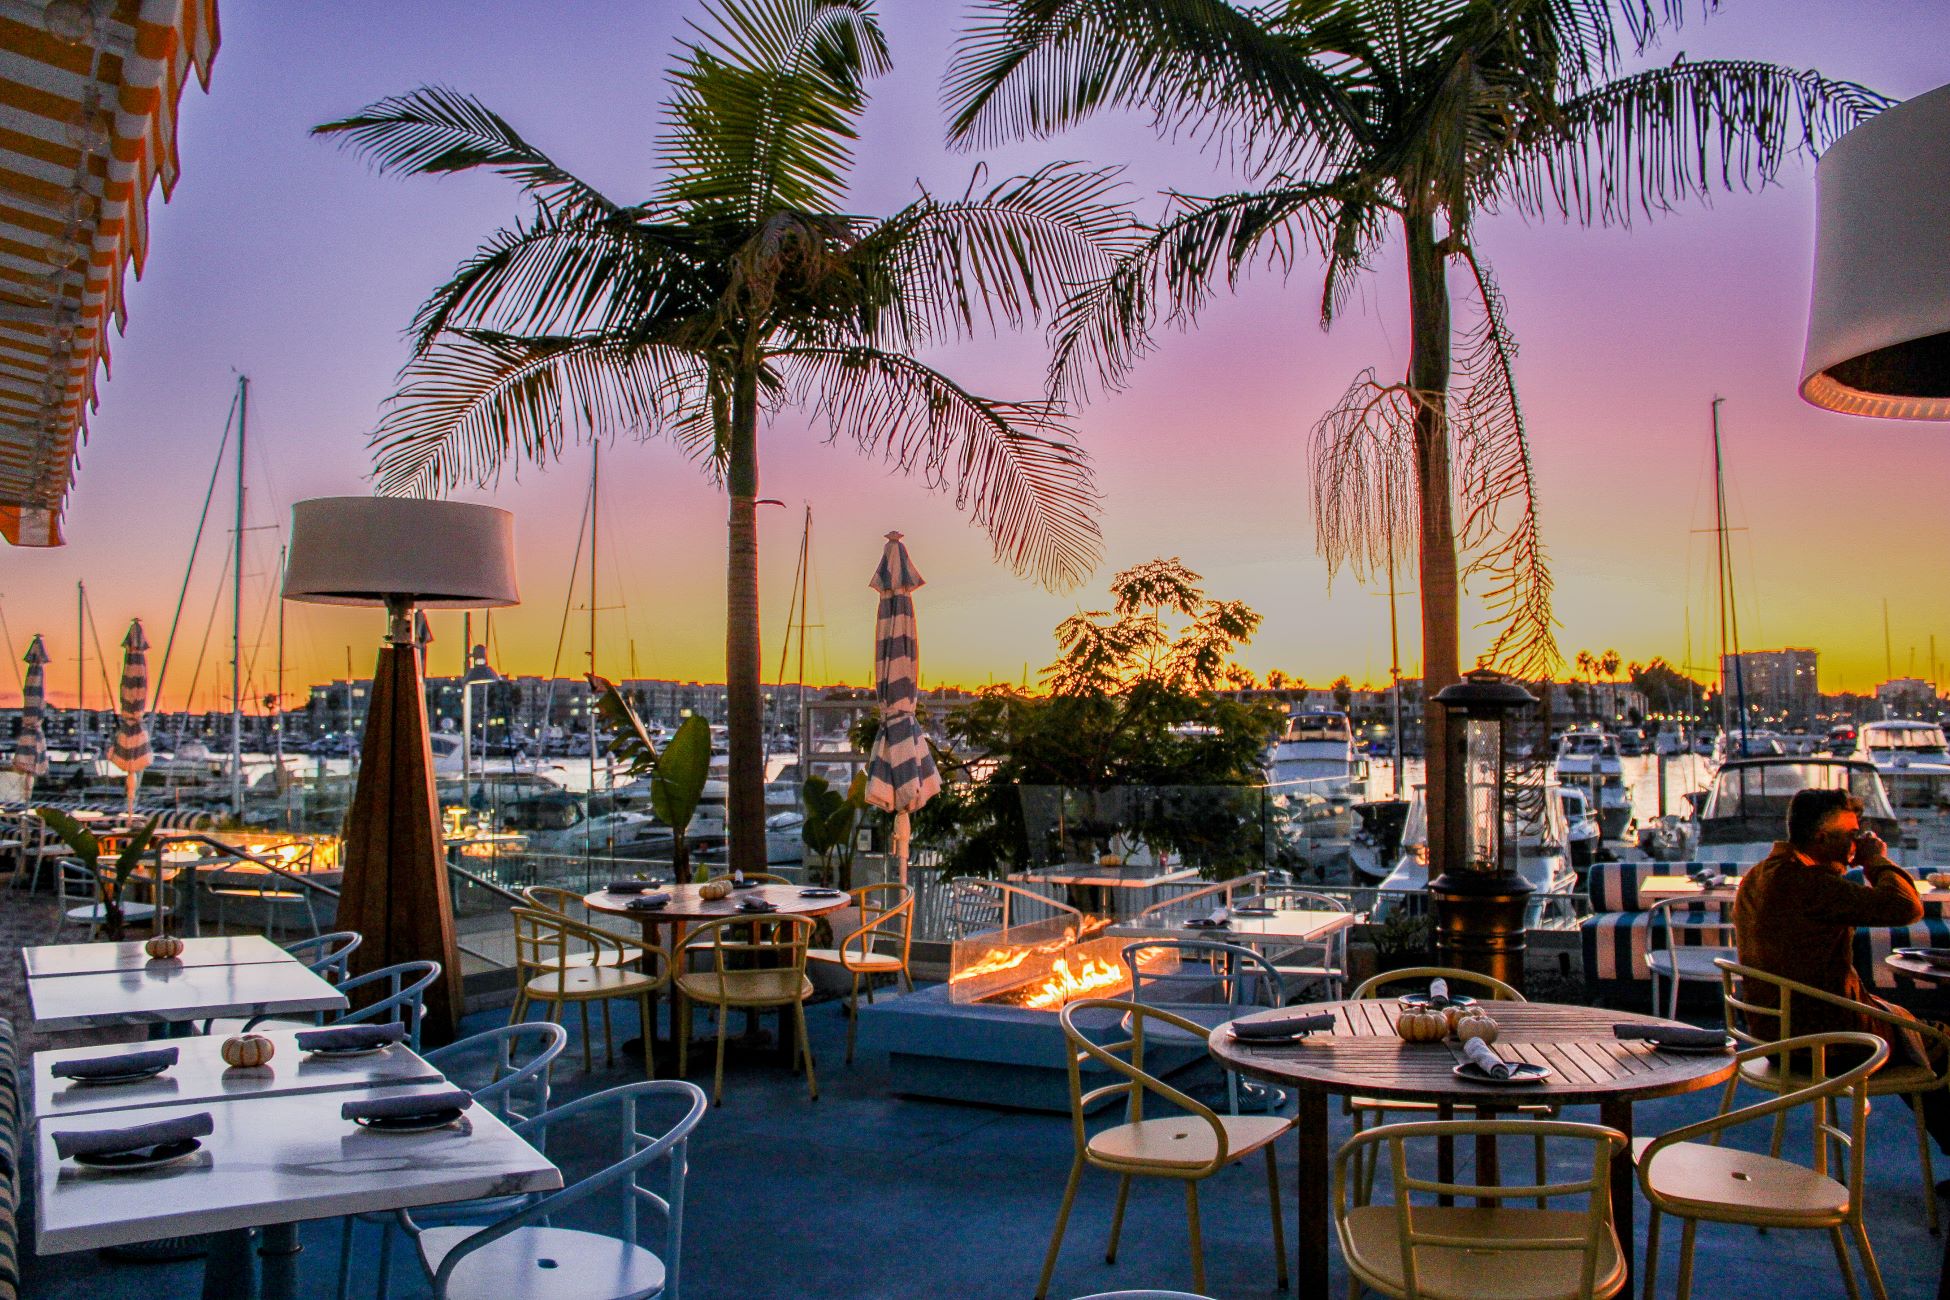 An image of the marina view from the Marina Del Rey Hotel's Del Rey Lounge.